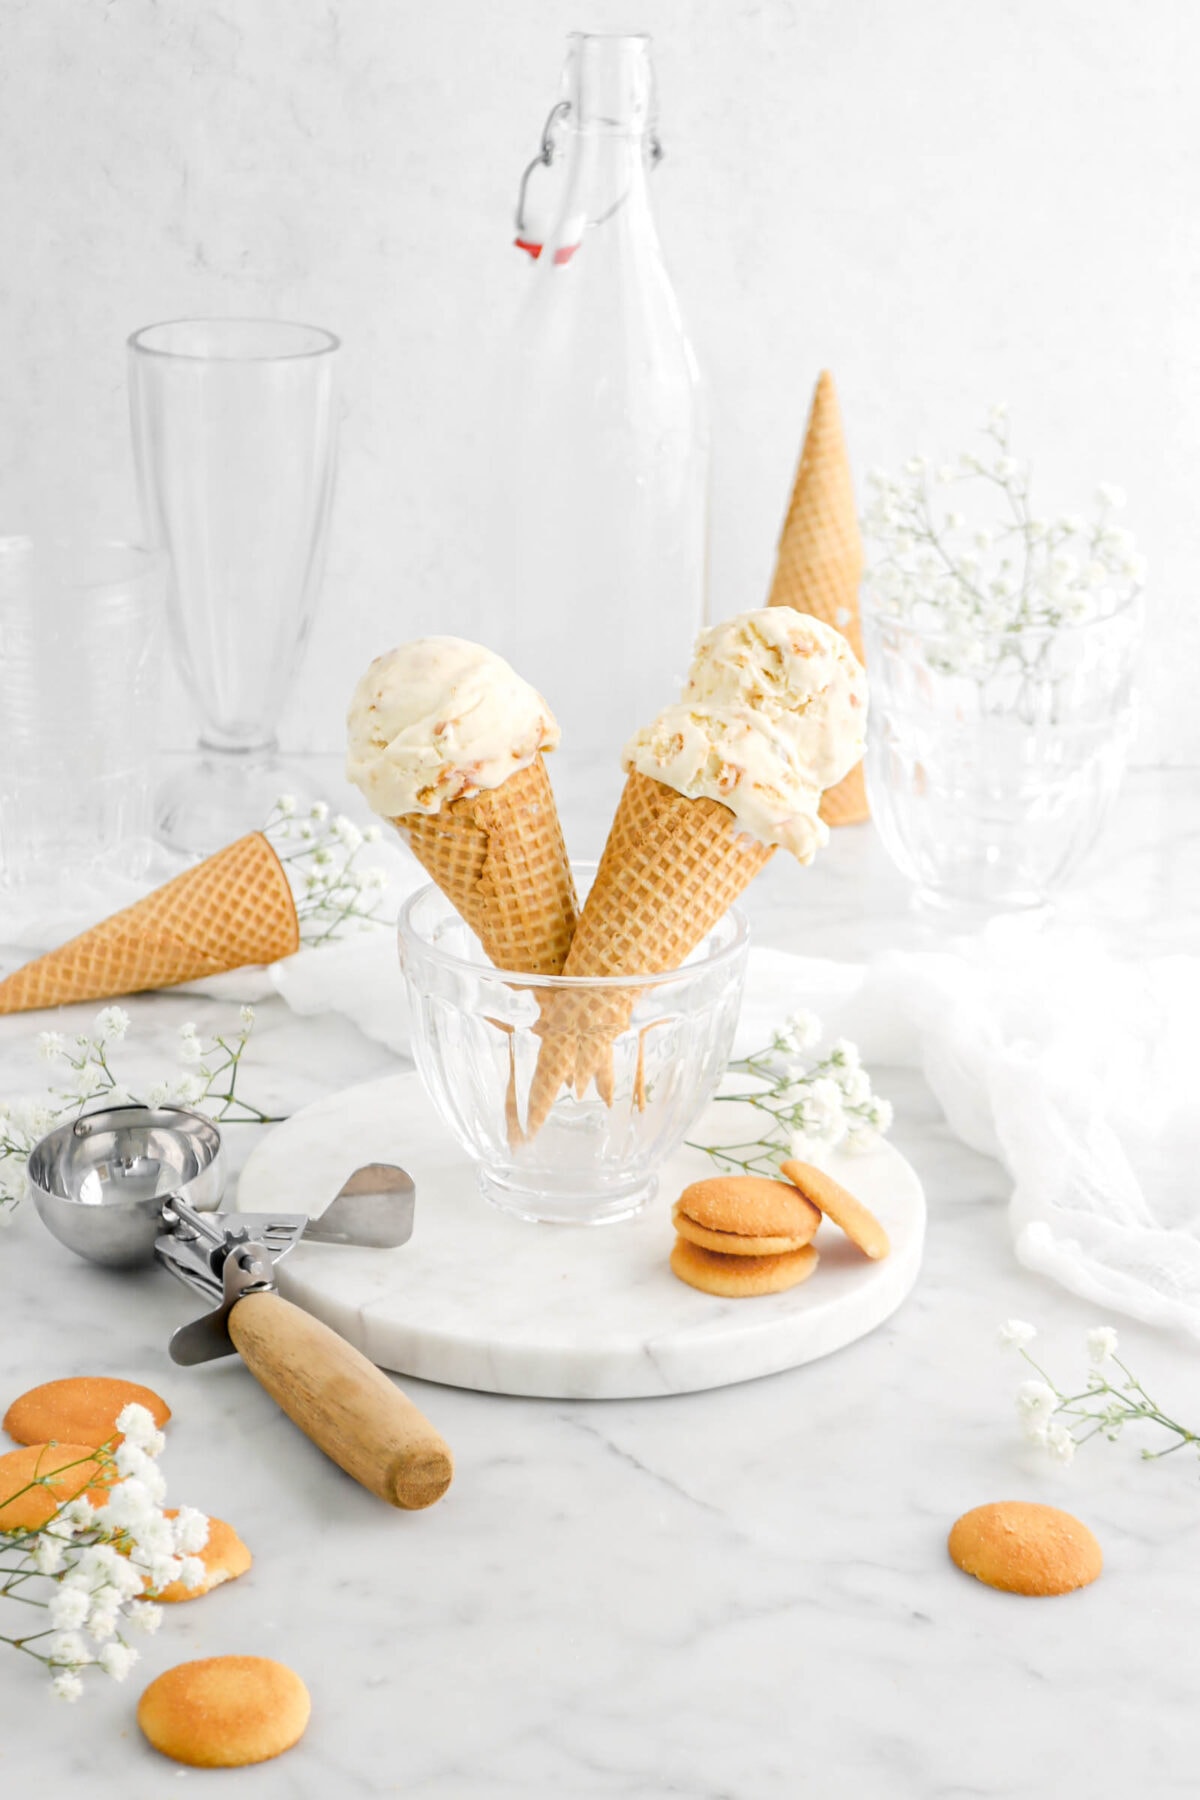 pulled back shot of banana pudding ice cream in two sugar cones in a glass bowl on a marble plate with empty cones behind, vanilla wafers and flowers around, an antique ice cream scoop beside, and an empty milkshake glass behind